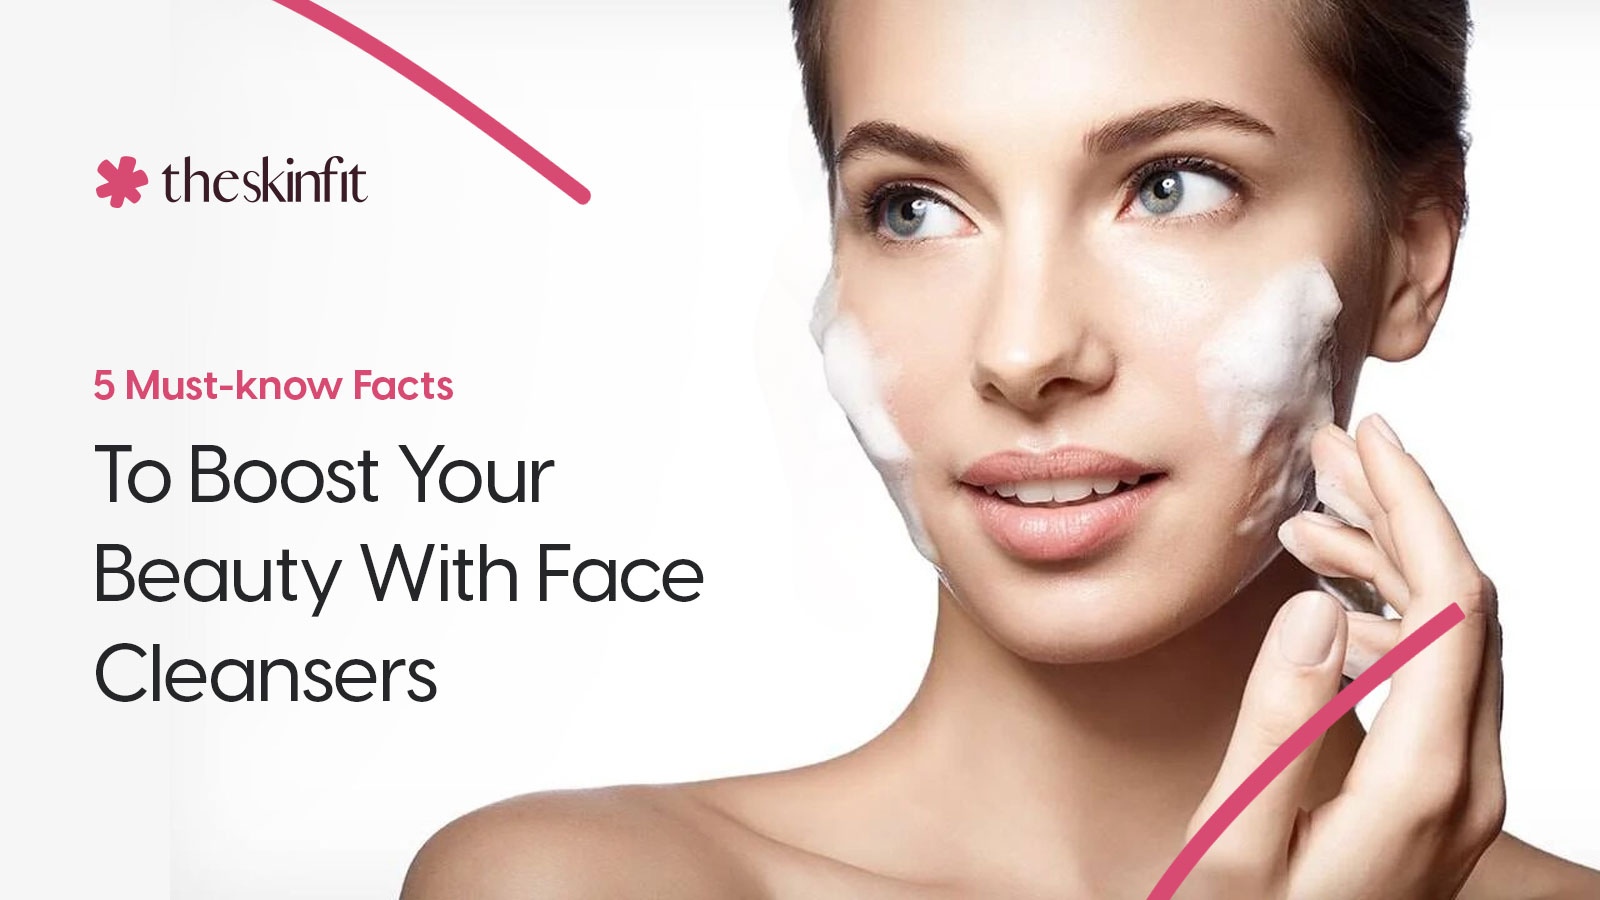 5 Must-know Facts To Boost Your Beauty With Face Cleansers 